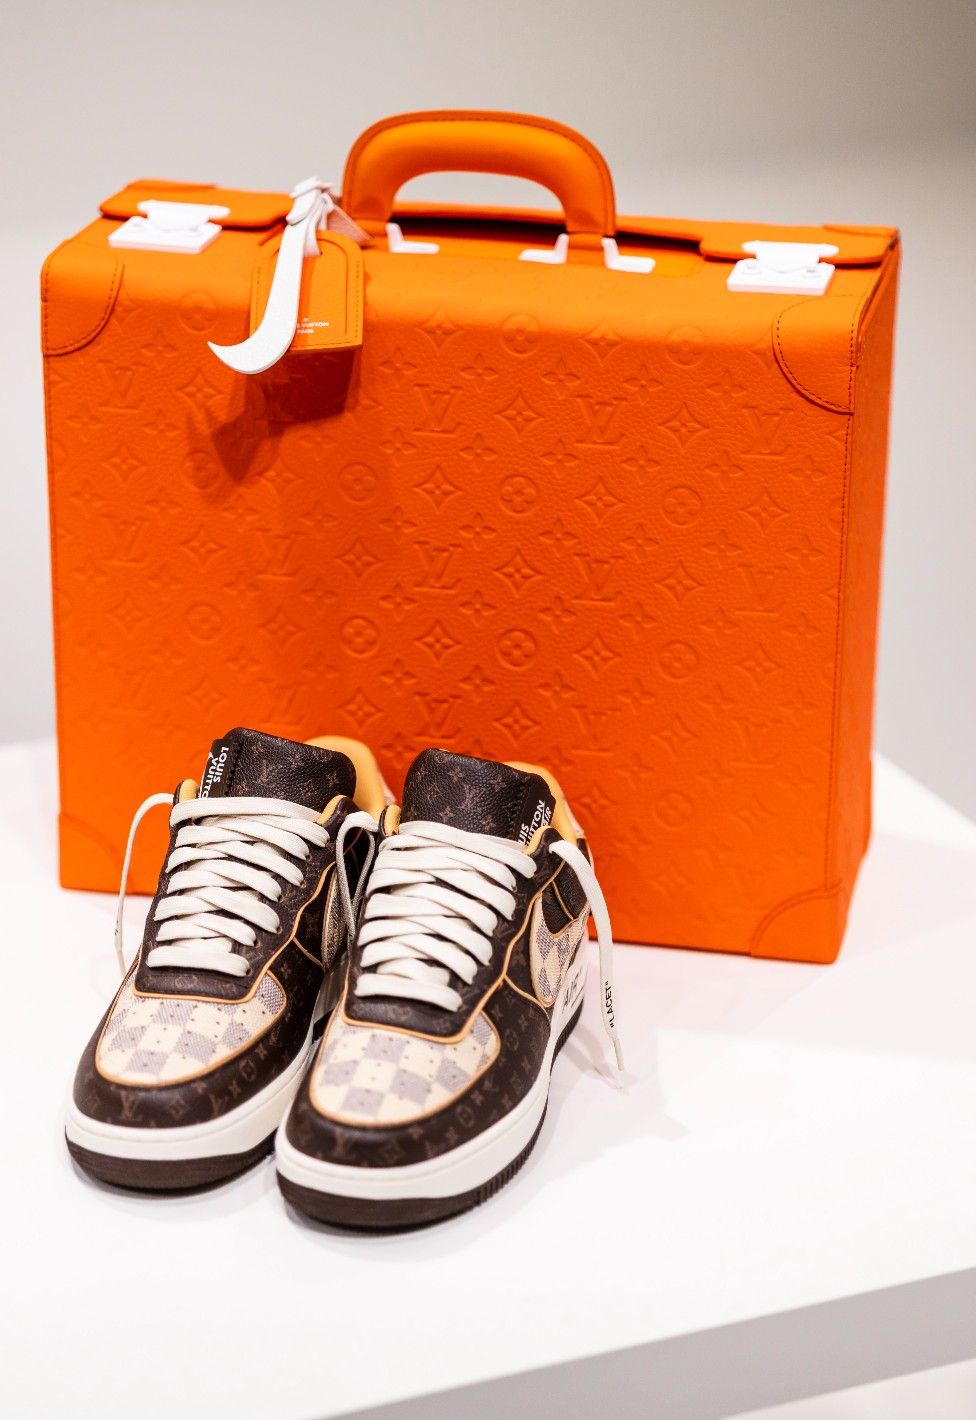 A pair of limited edition Louis Vuitton Nike Air Force 1 sneakers, created by the late US designer Virgil Abloh